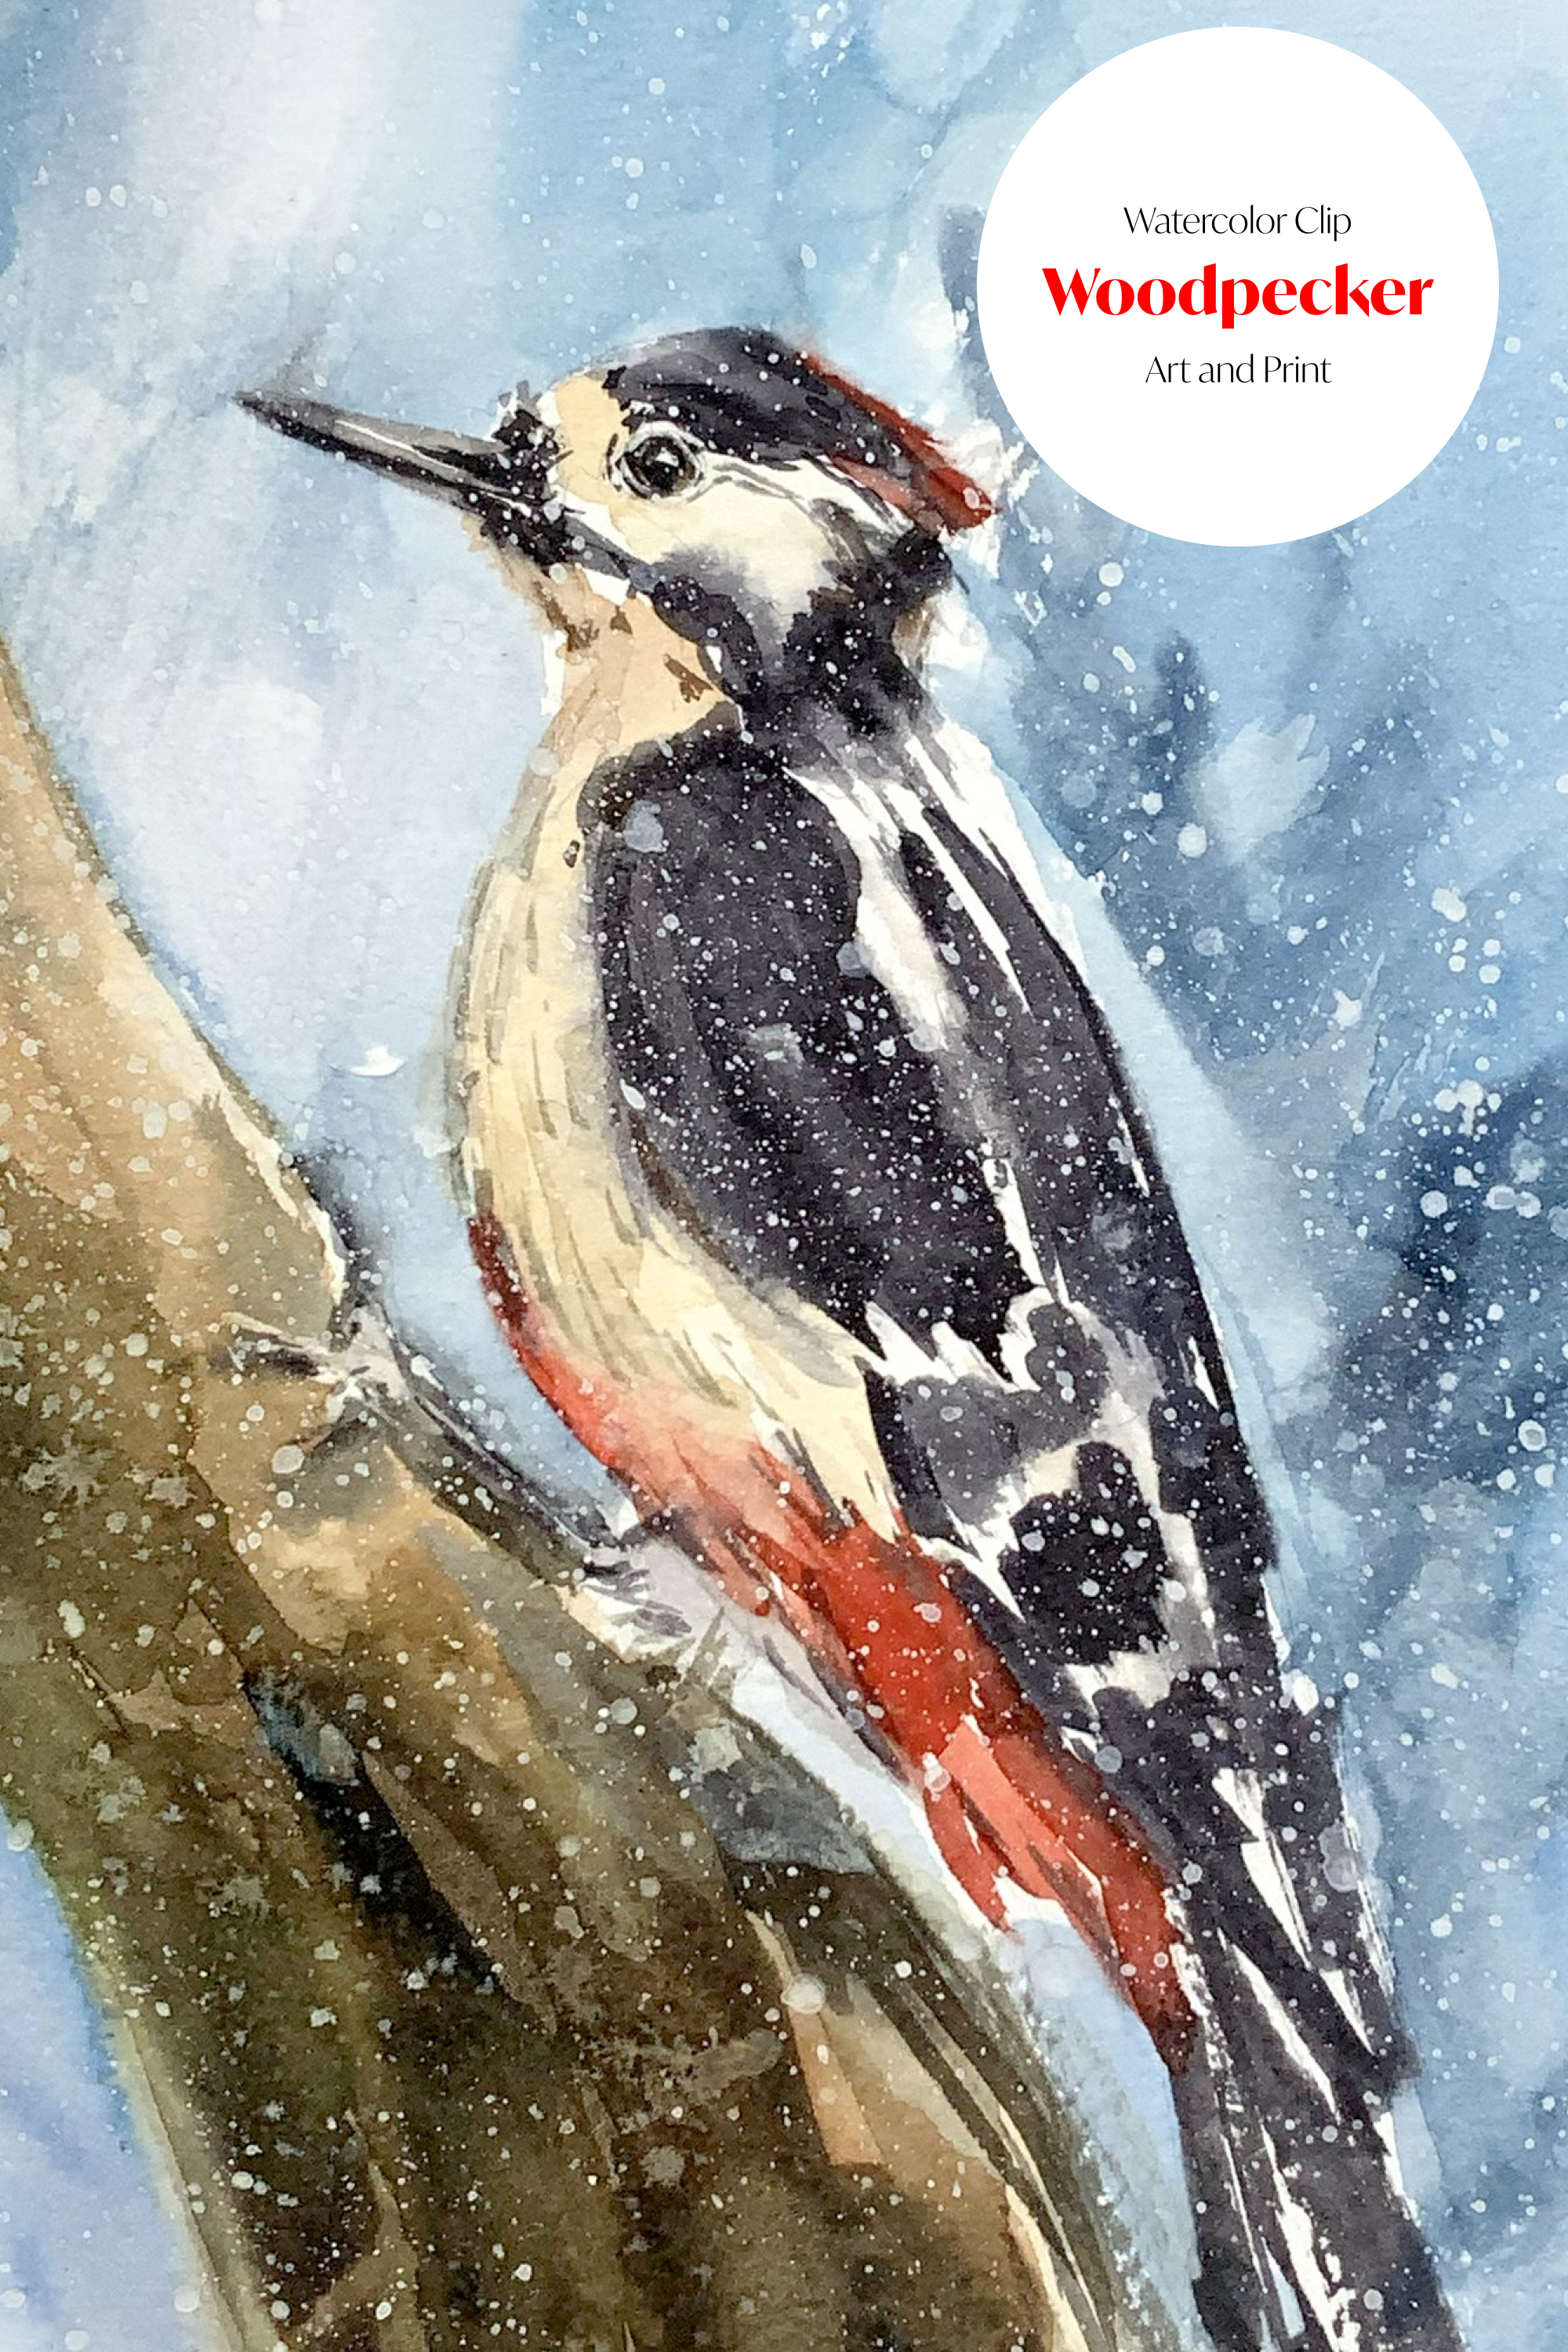 Woodpecker watercolor clip art and print of pinterest.